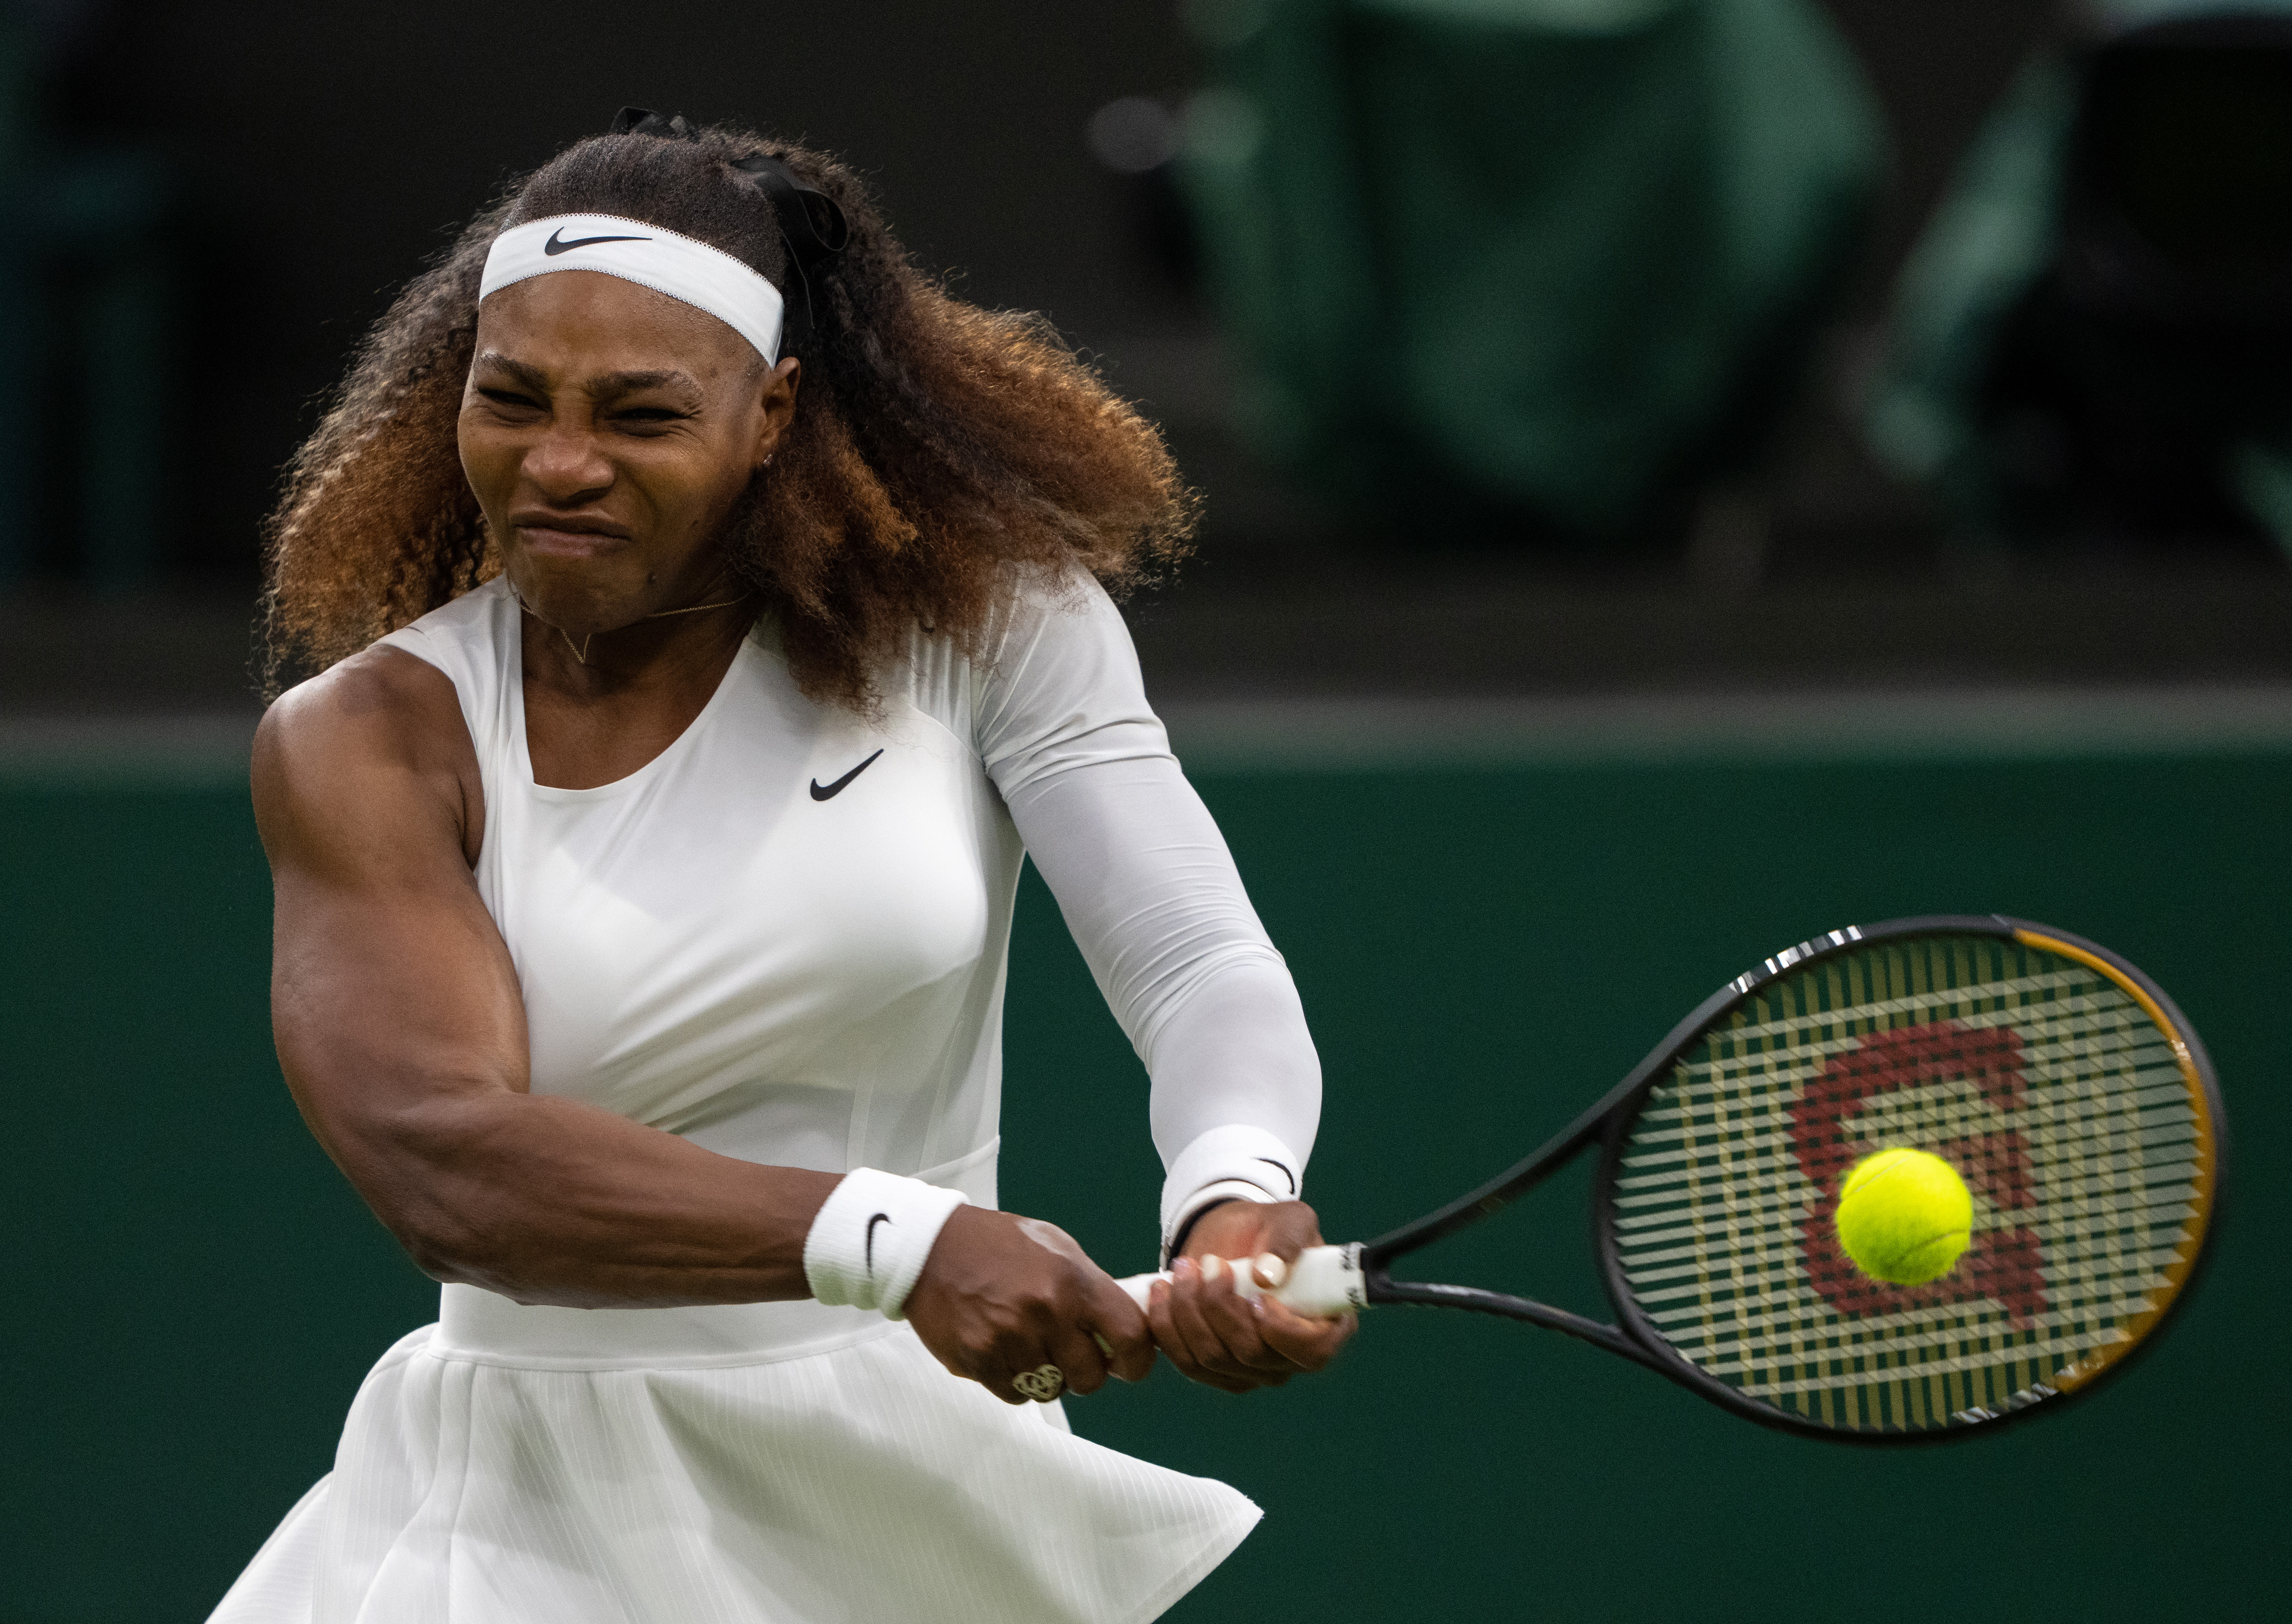 Serena Williams withdraws from U.S. Open due to torn hamstring | Reuters